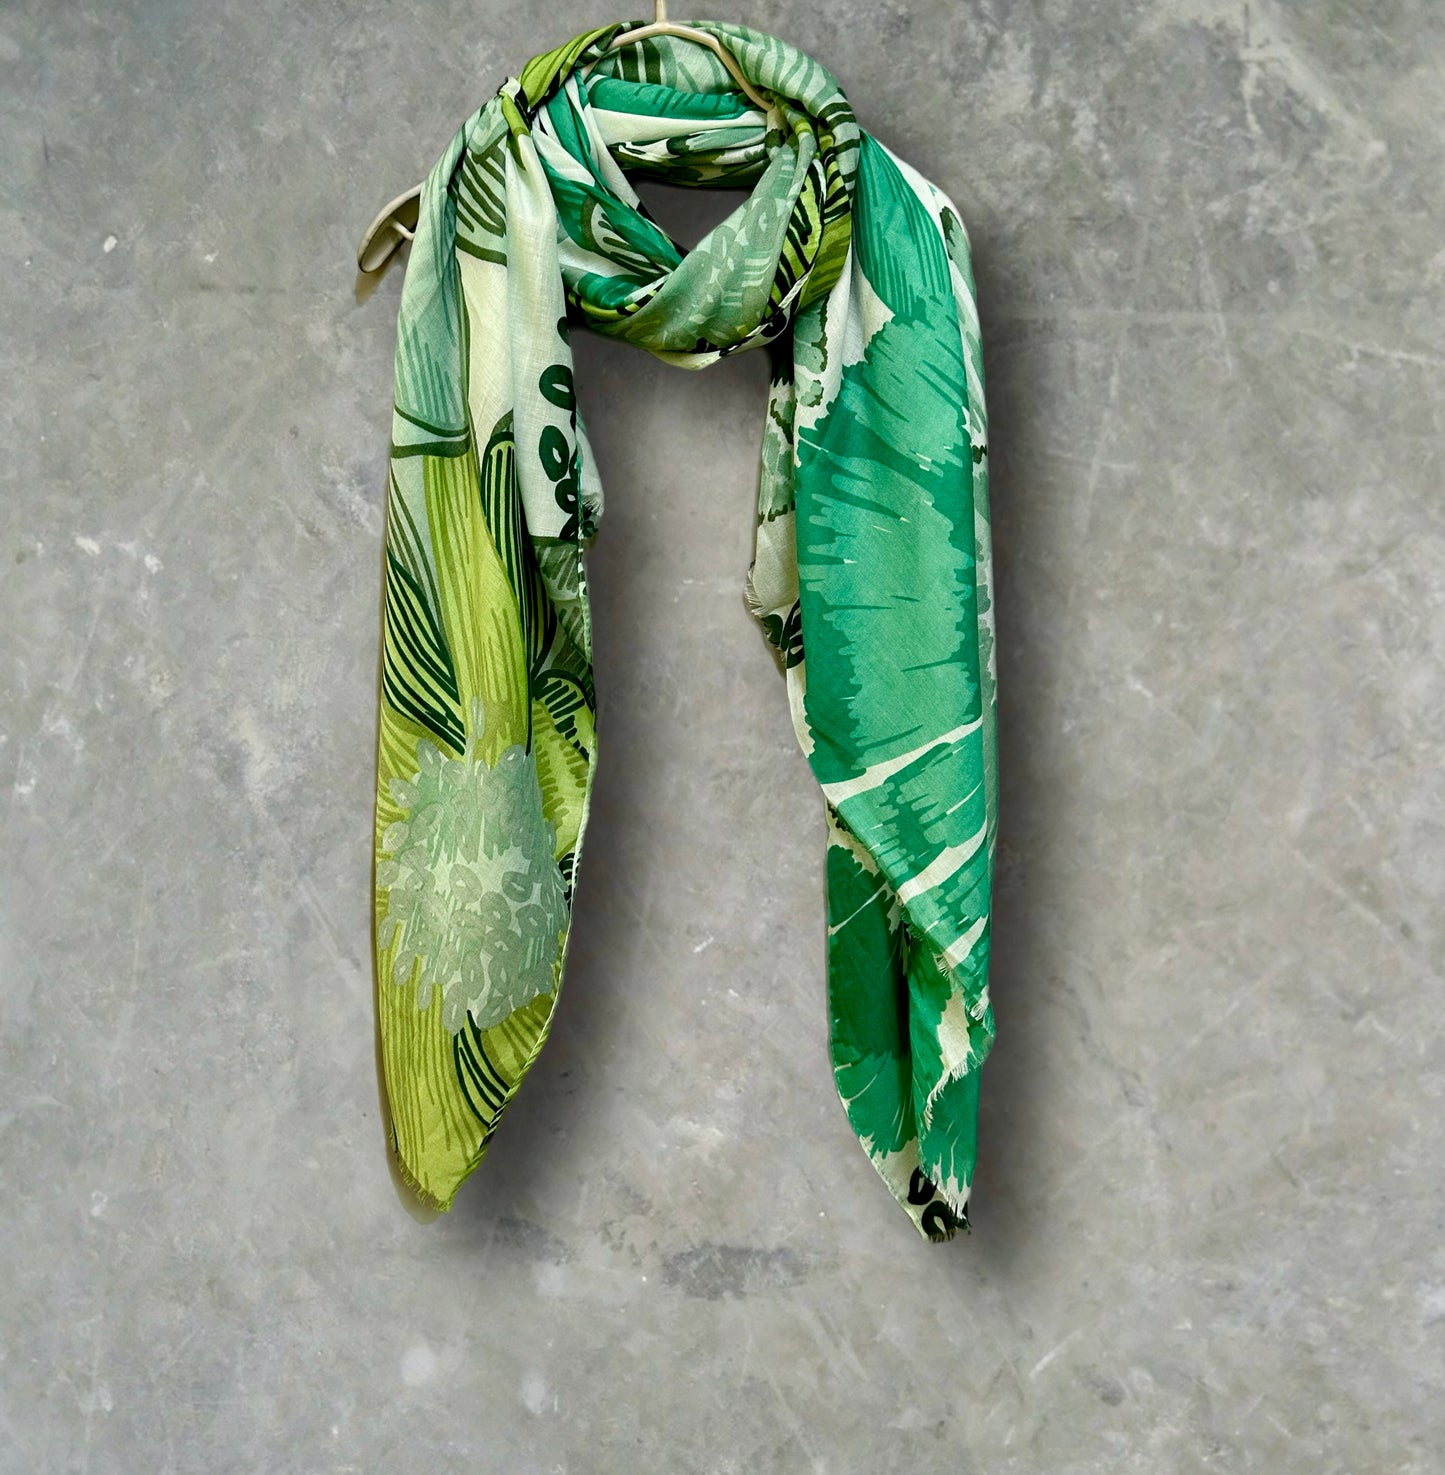 Stunning Green Scarf Featuring Huge Sketched Flowers for Women,Great for All Seasons,Perfect Gifts for Her,Mother,Birthday and Christmas.